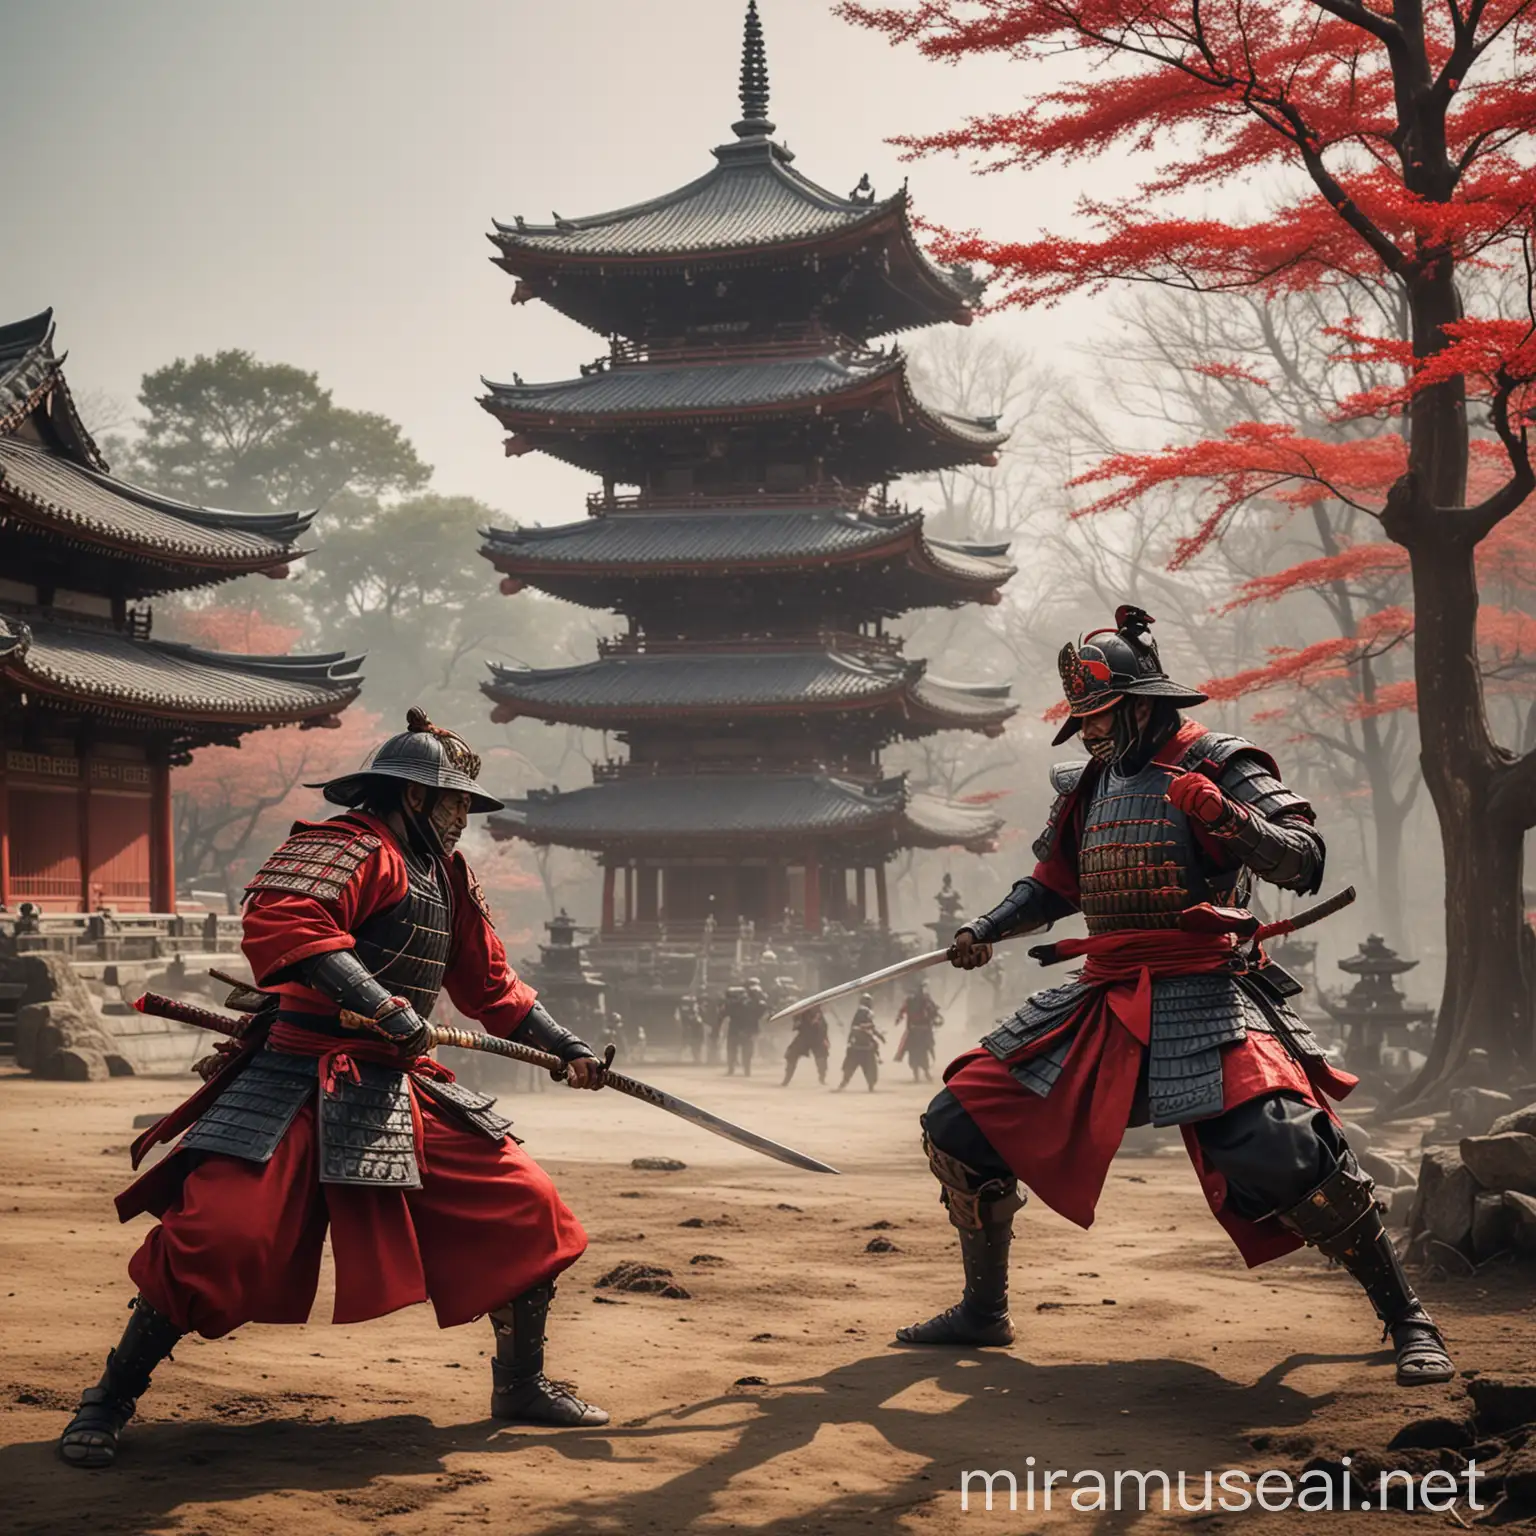 two samurai are fighting, one is wearing red armor, the other is wearing black armor, there is a pagoda in the background